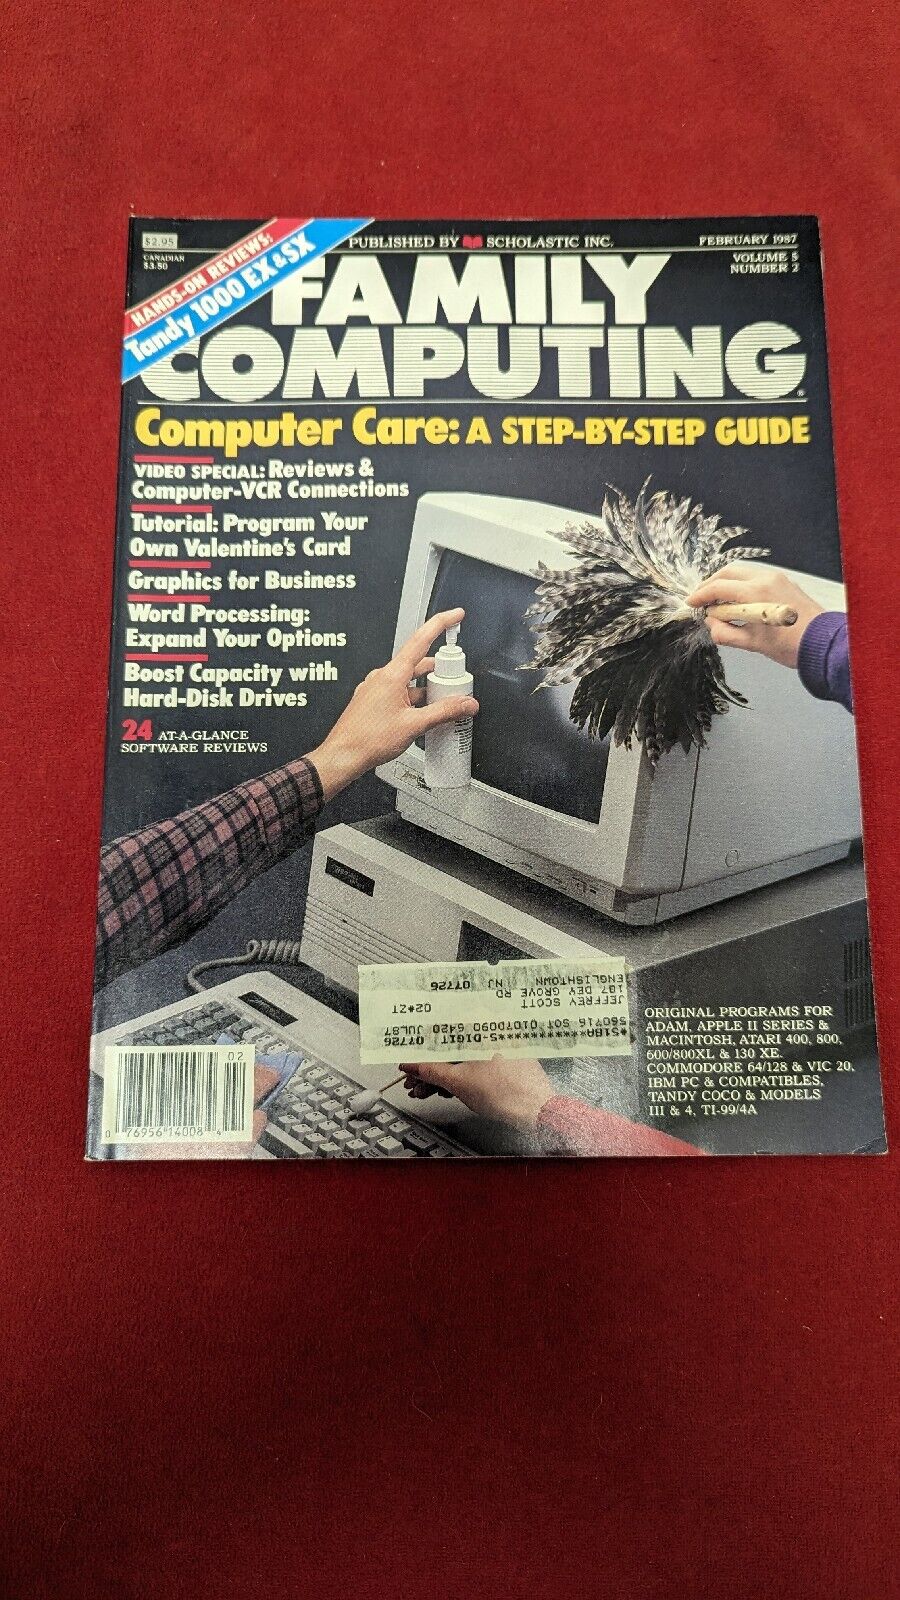 February 1987 Family Computing Magazine Computer Care Guide Volume 5 Number 2